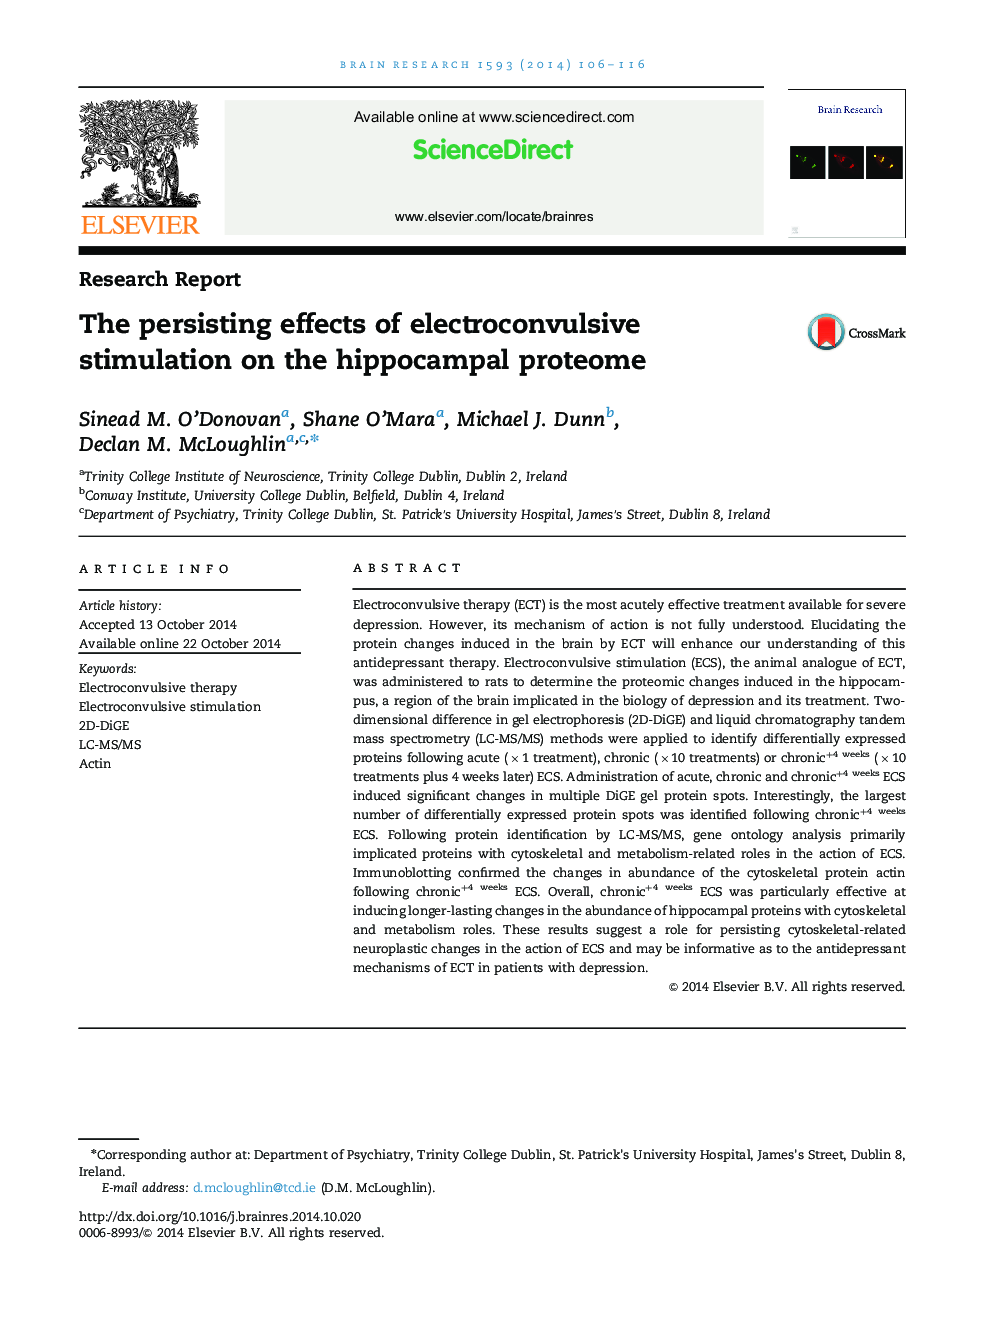 The persisting effects of electroconvulsive stimulation on the hippocampal proteome